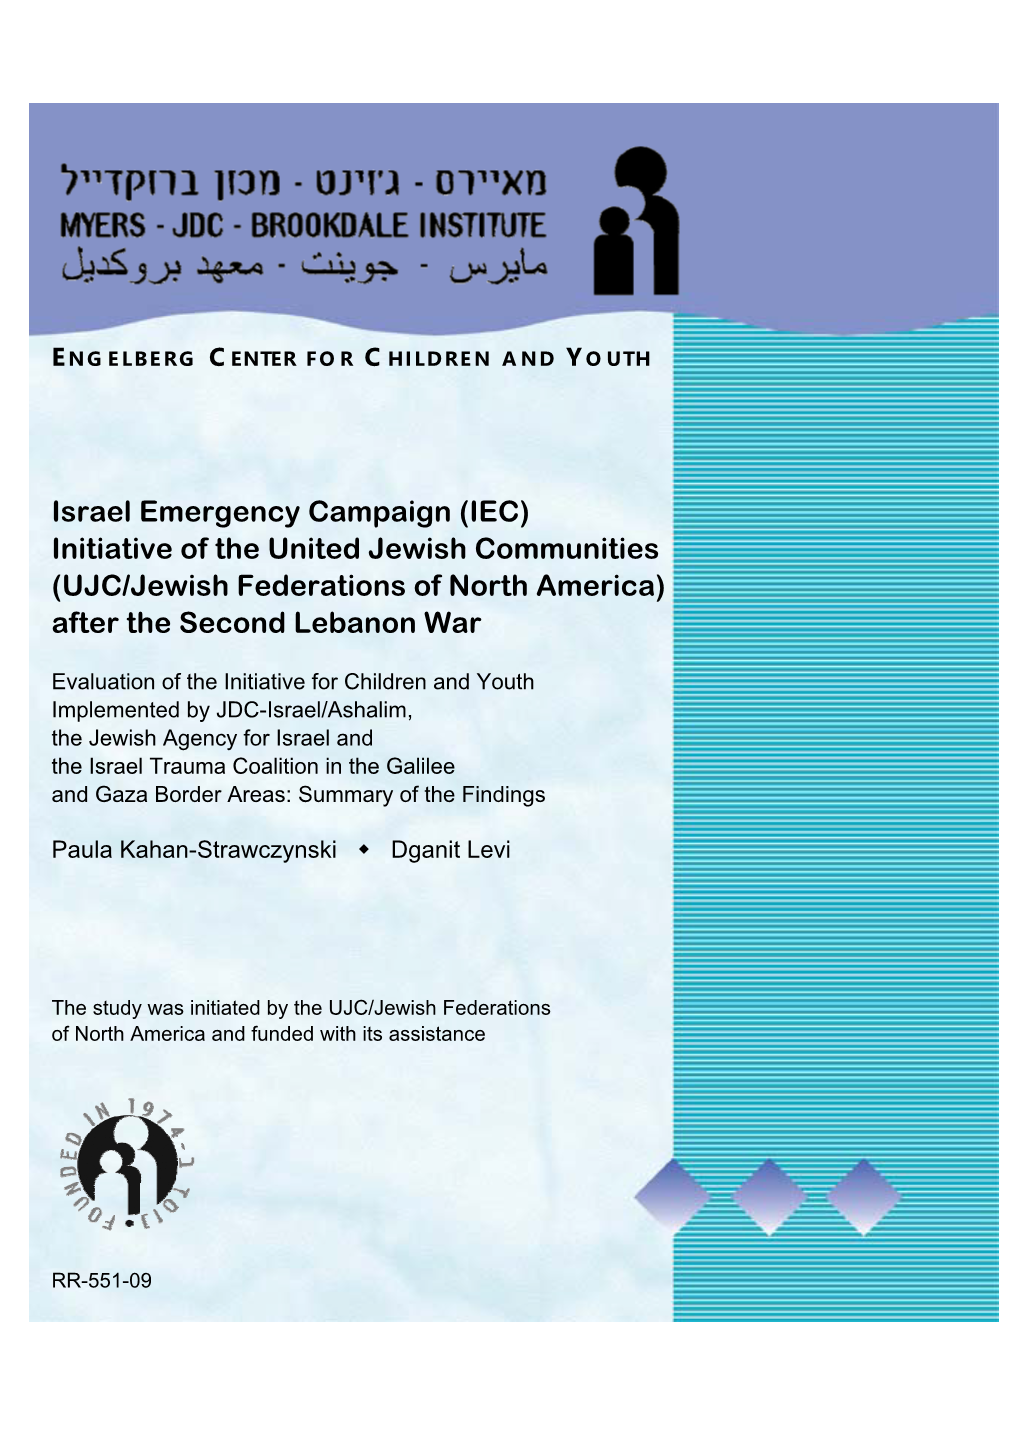 Israel Emergency Campaign (IEC) Initiative of the United Jewish Communities (UJC/Jewish Federations of North America) After the Second Lebanon War